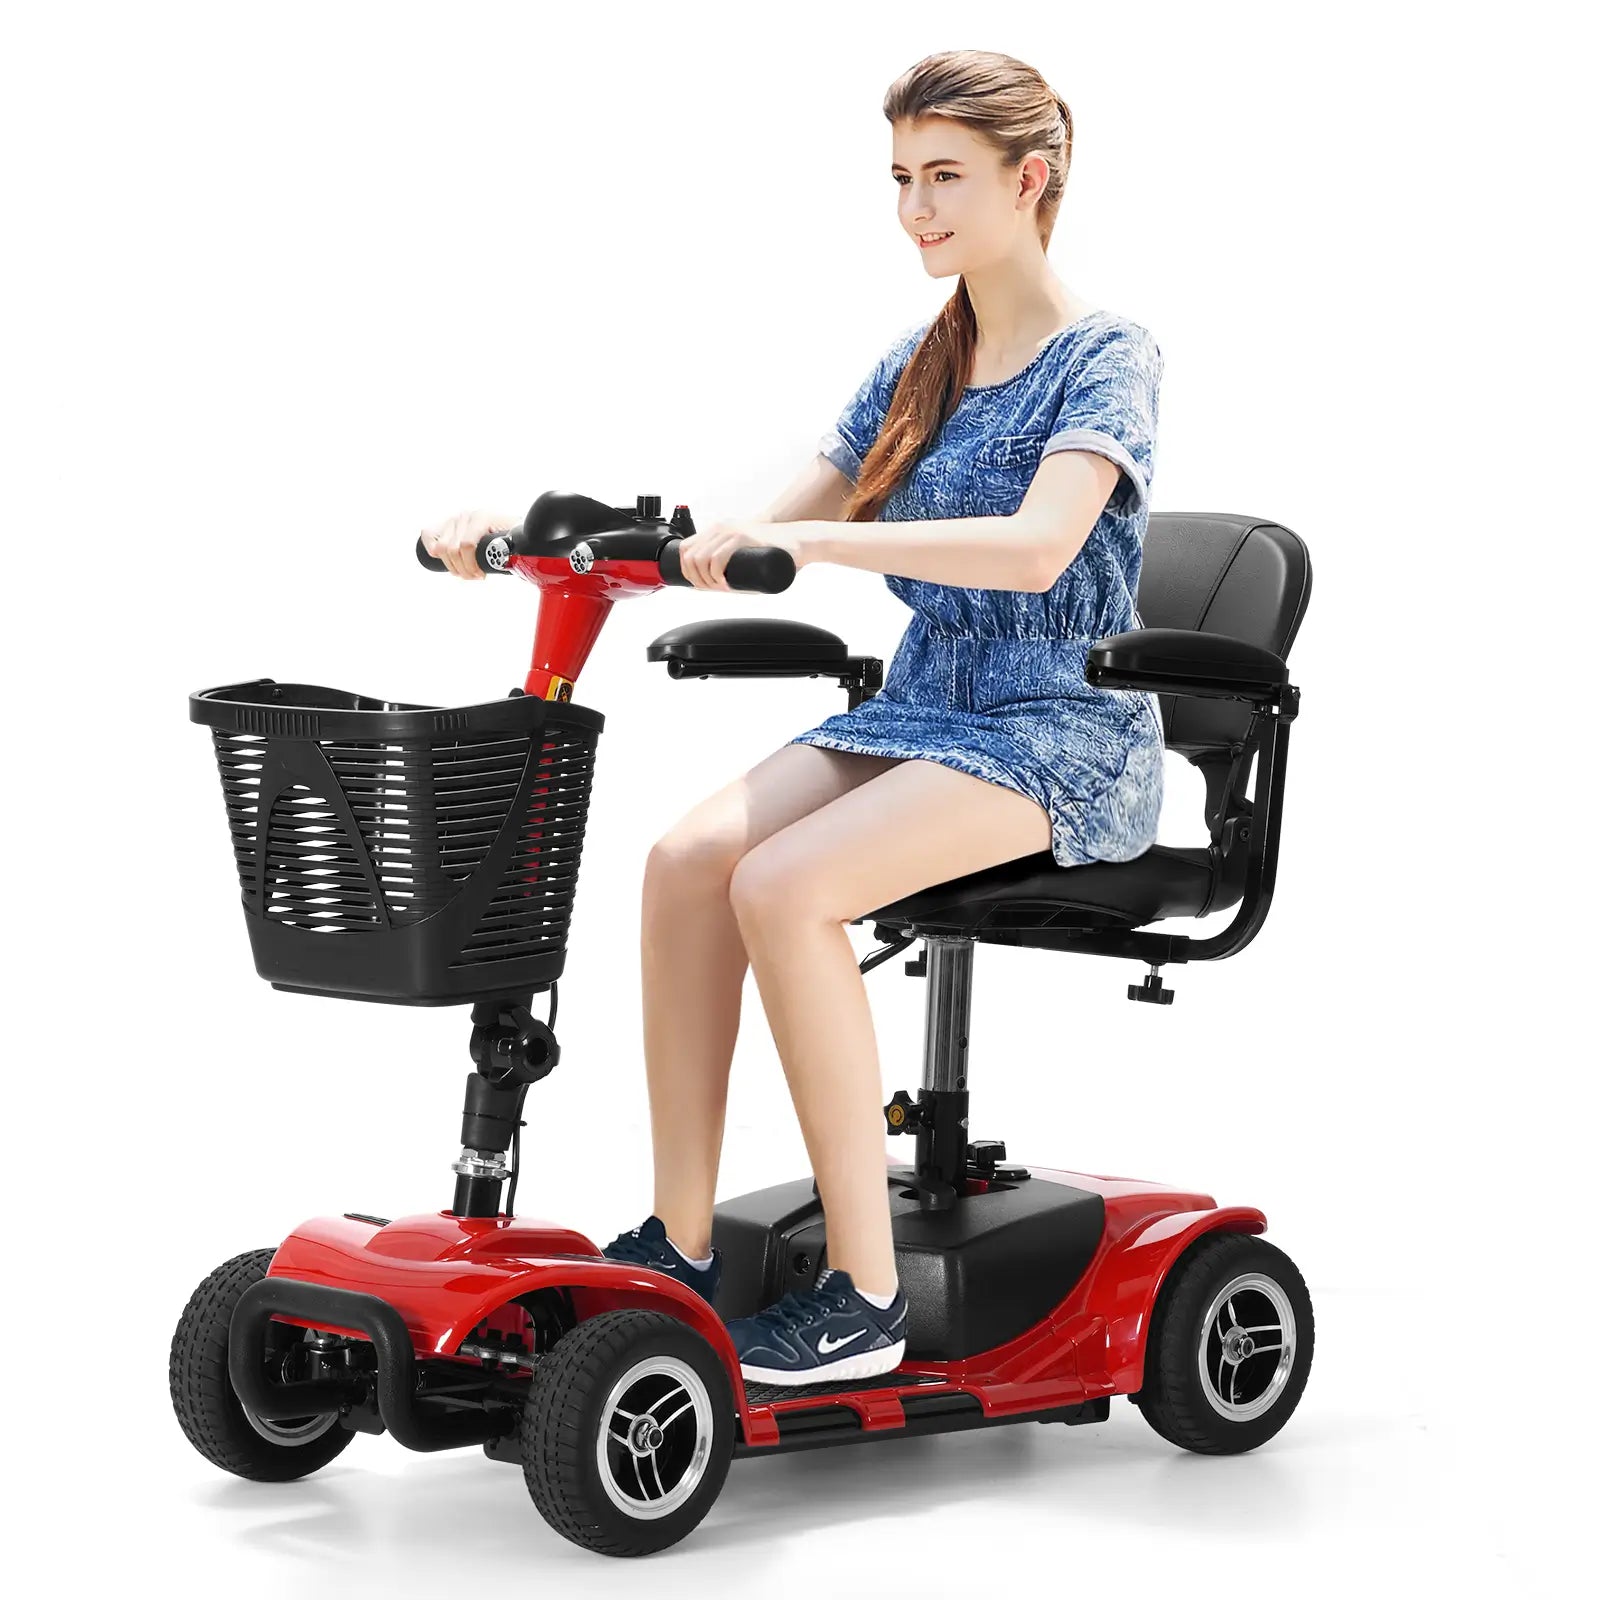 Soulout: Mobility Scooter, Electric Wheelchair, Lift Chairs